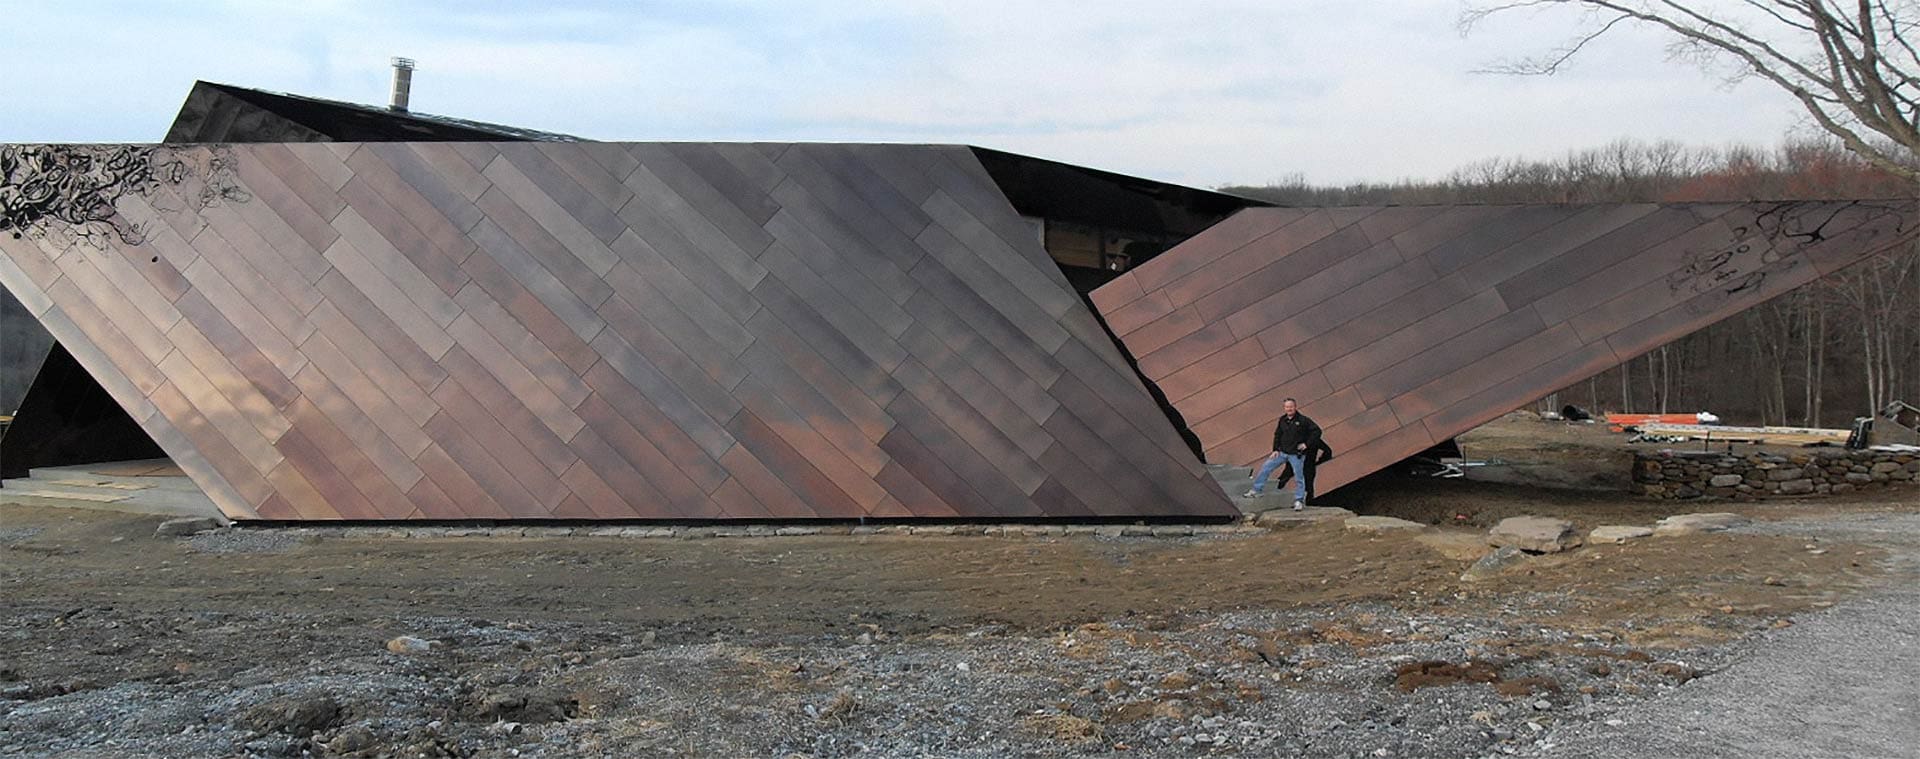 Zahner Field Operator stands in front of the Residence in Connecticut designed by Studio Daniel Libeskind.